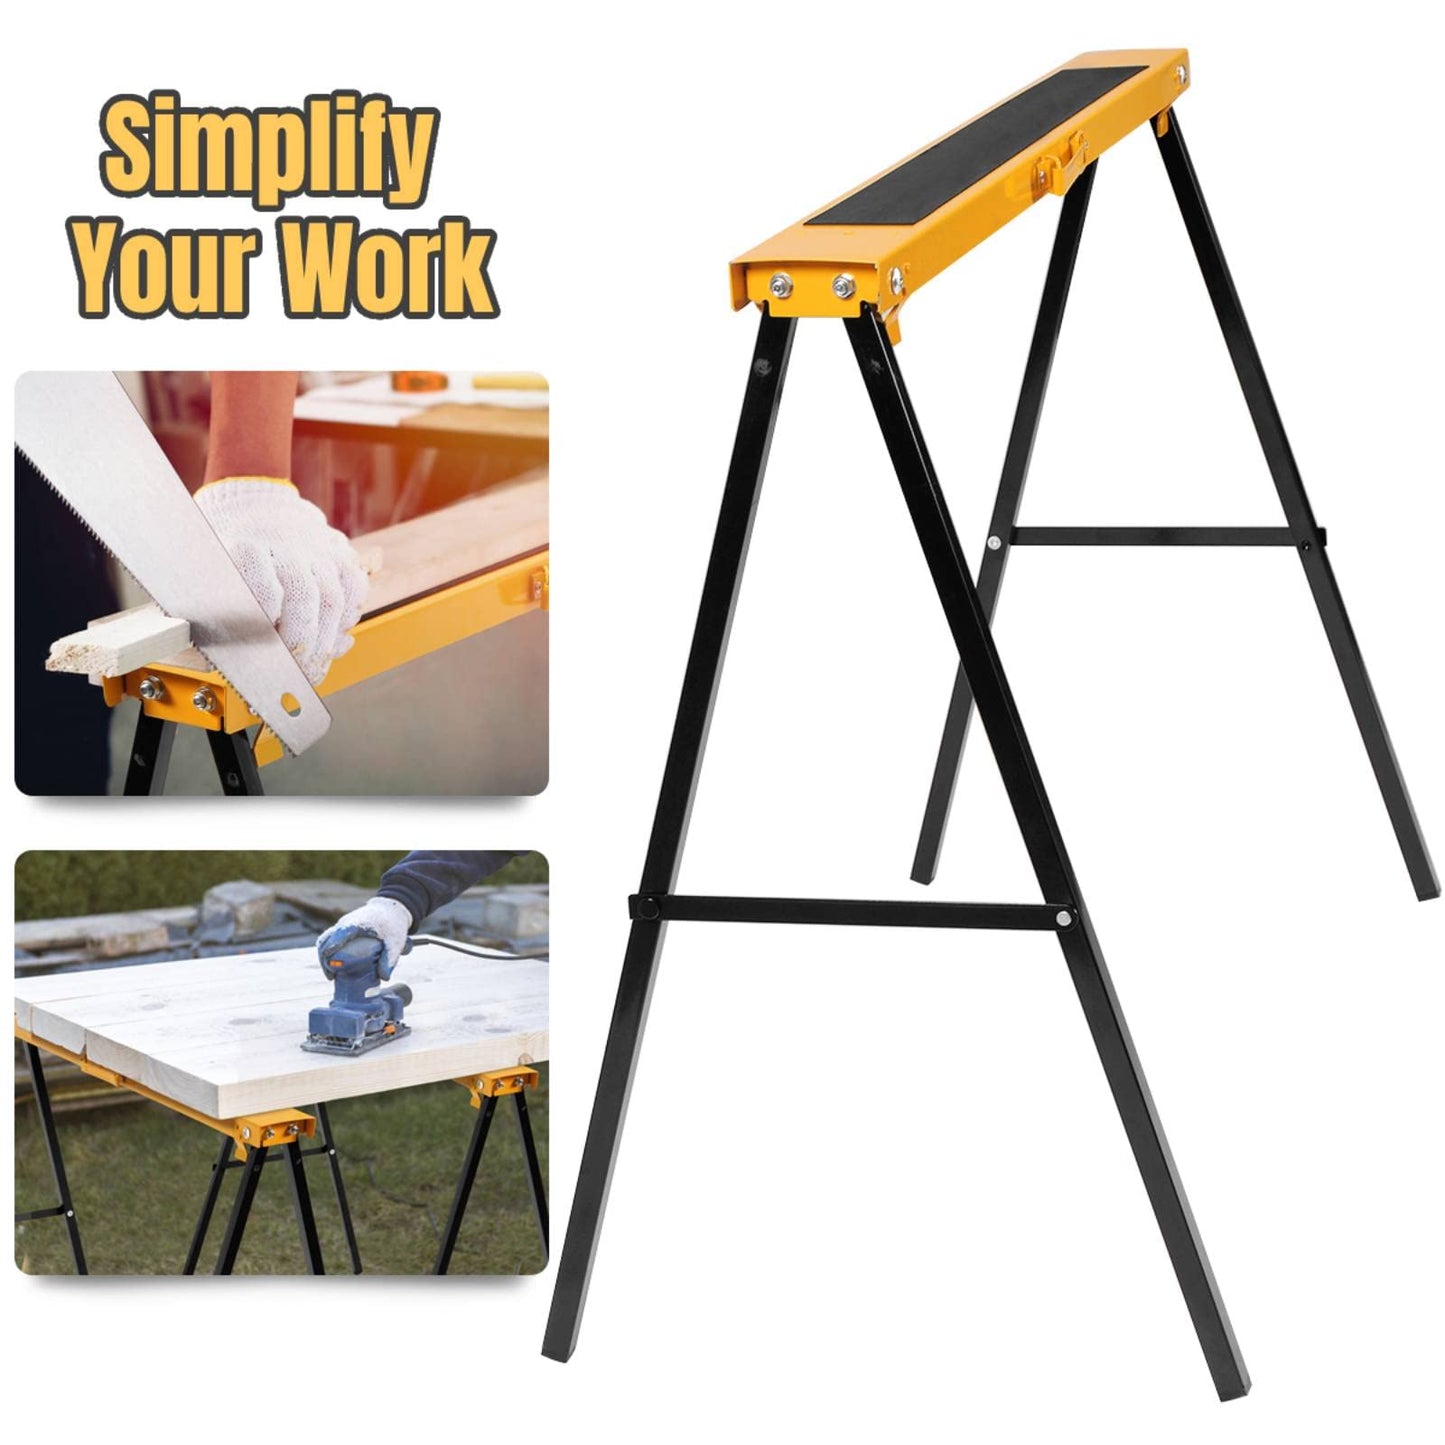 IRONMAX Saw Horses 2 Pack Folding, Heavy Duty Sawhorse w/ Non-slip Work Table Surface & 2x4 Fast Open Legs, Portable Sawhorses Bench Twin Pack for